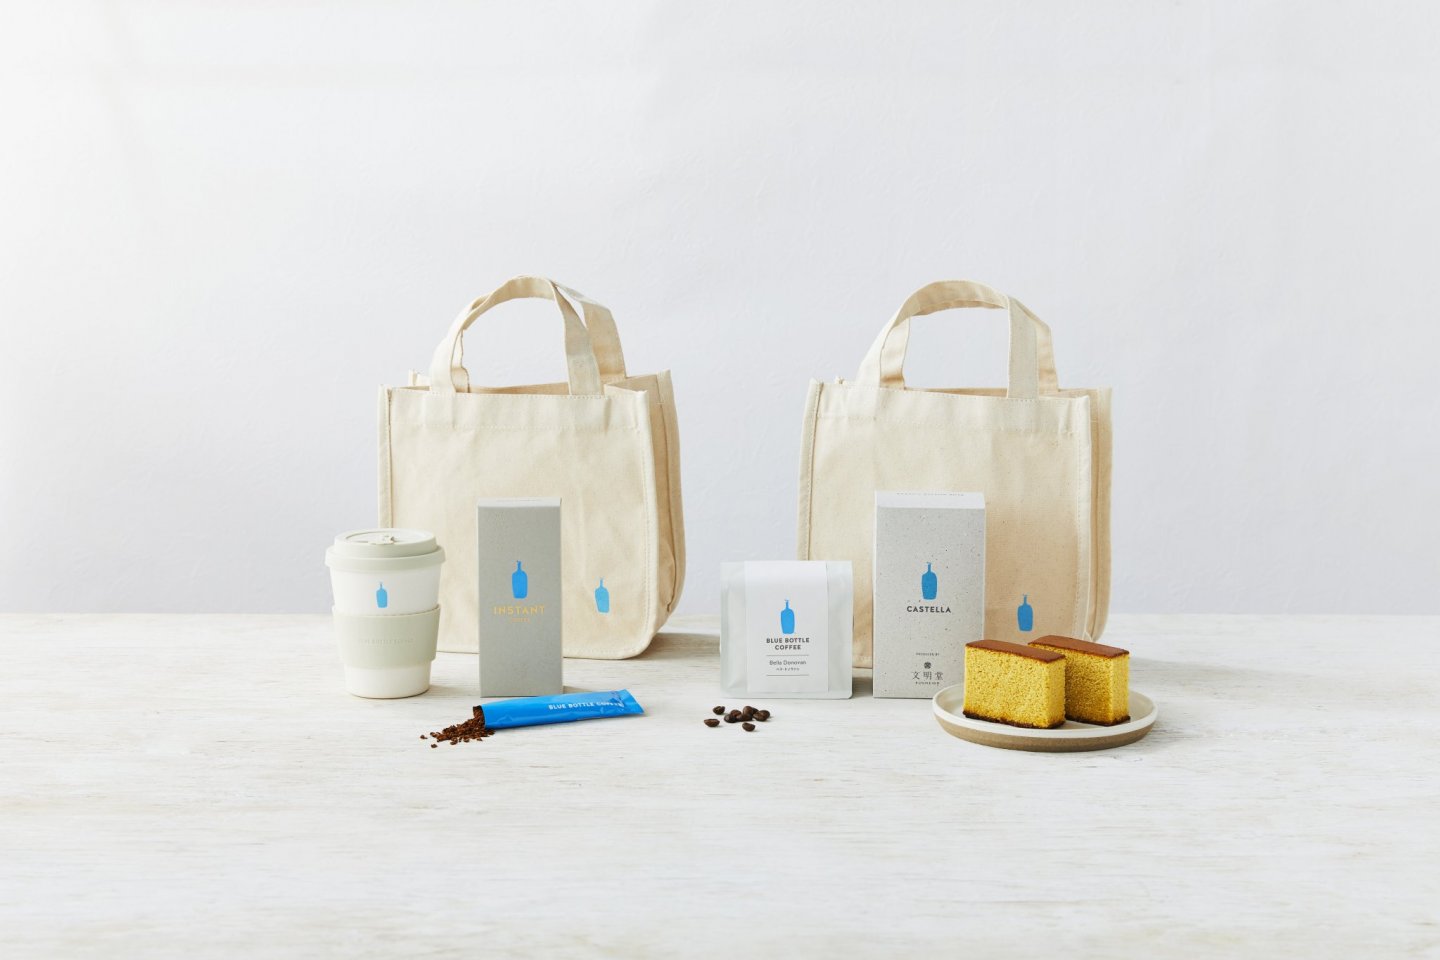 The pop-up event will have a range of Blue Bottle merchandise available for purchase